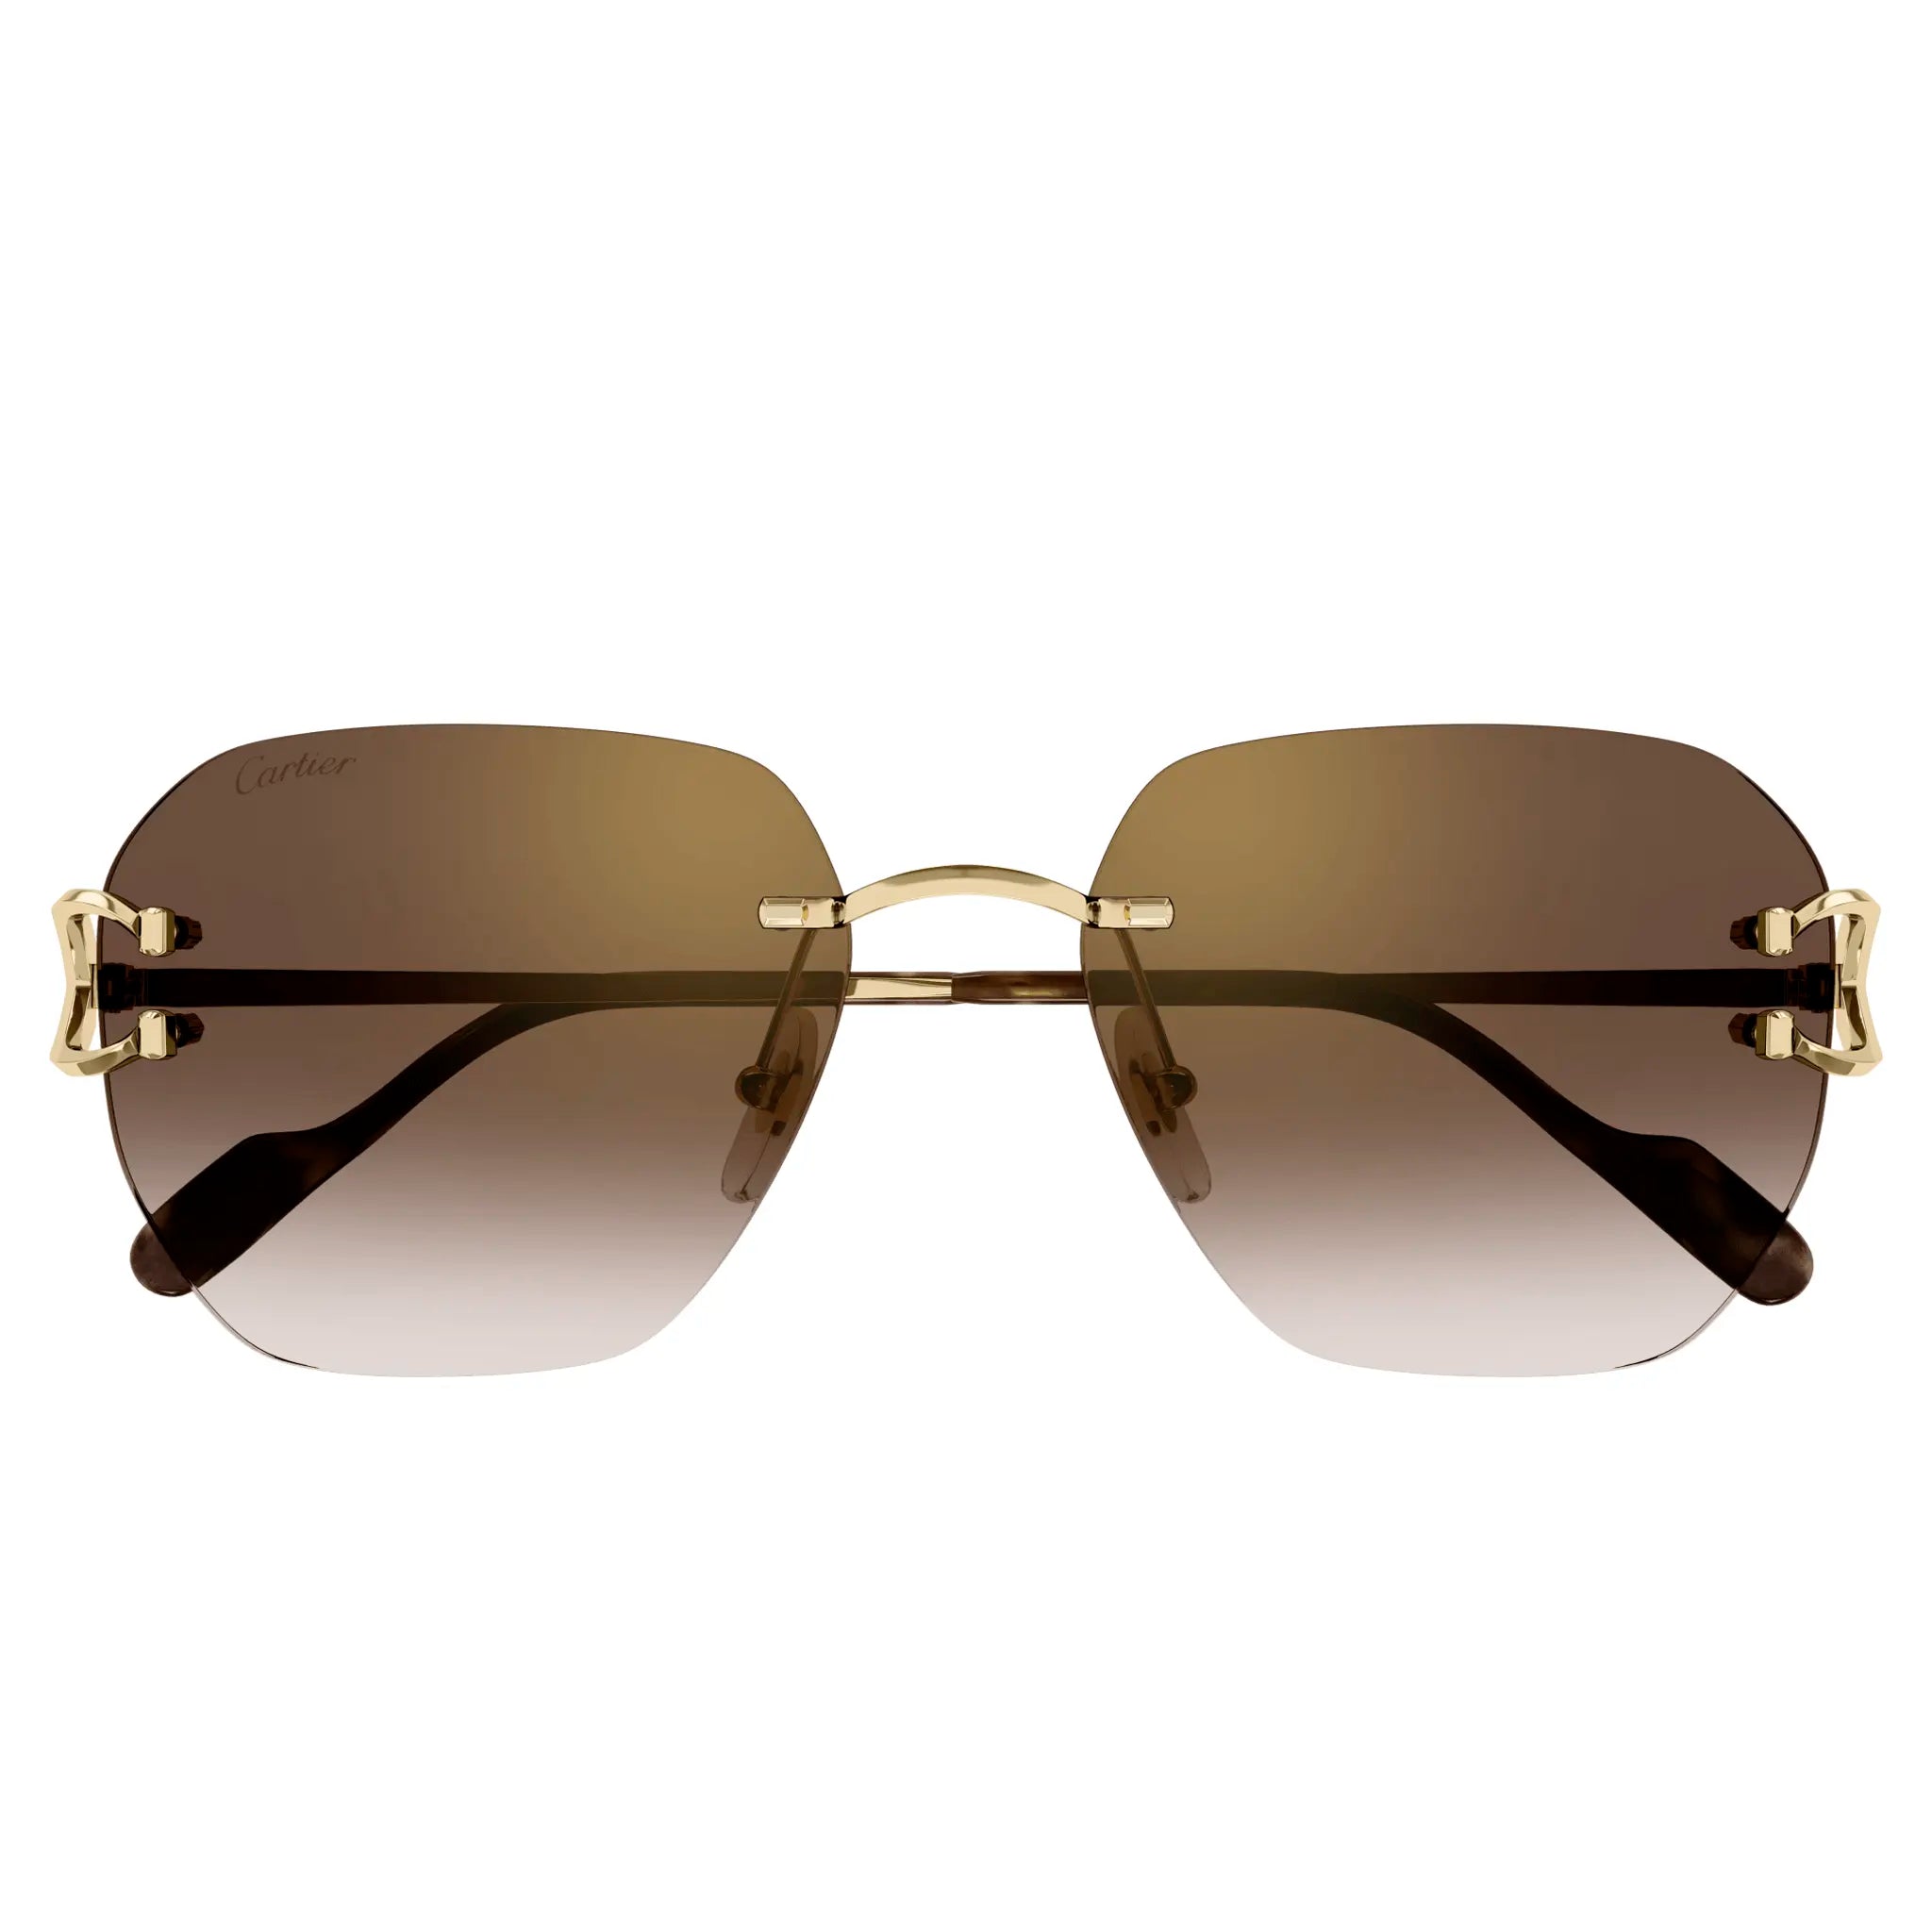 Front view of Cartier Eyewear CT0394S-002 C Decor Gold Brown Rimless Sunglasses